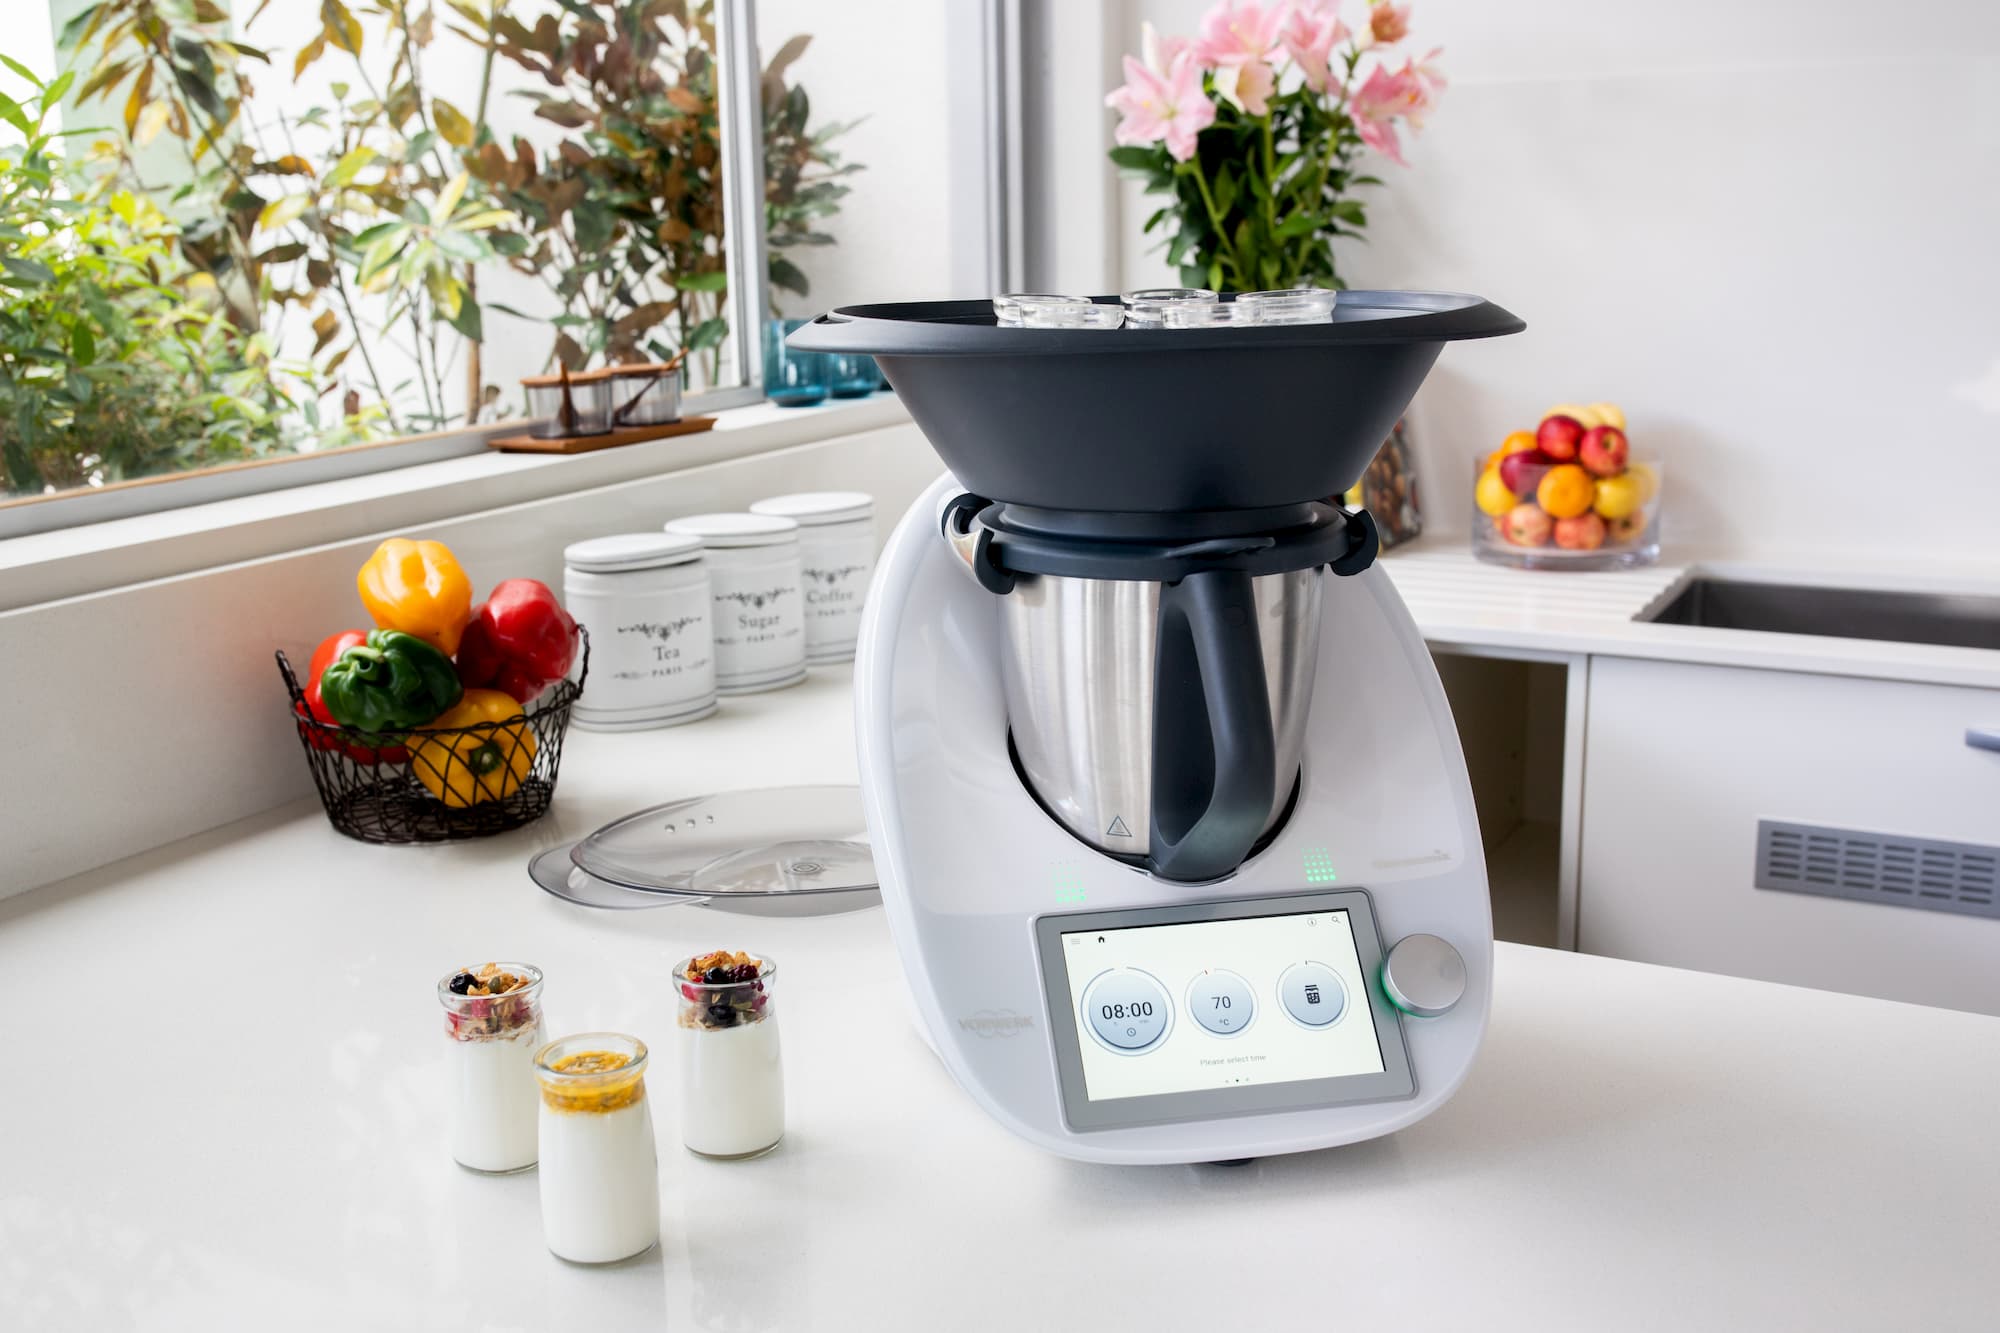 Thermomix machine on a kitchen counter